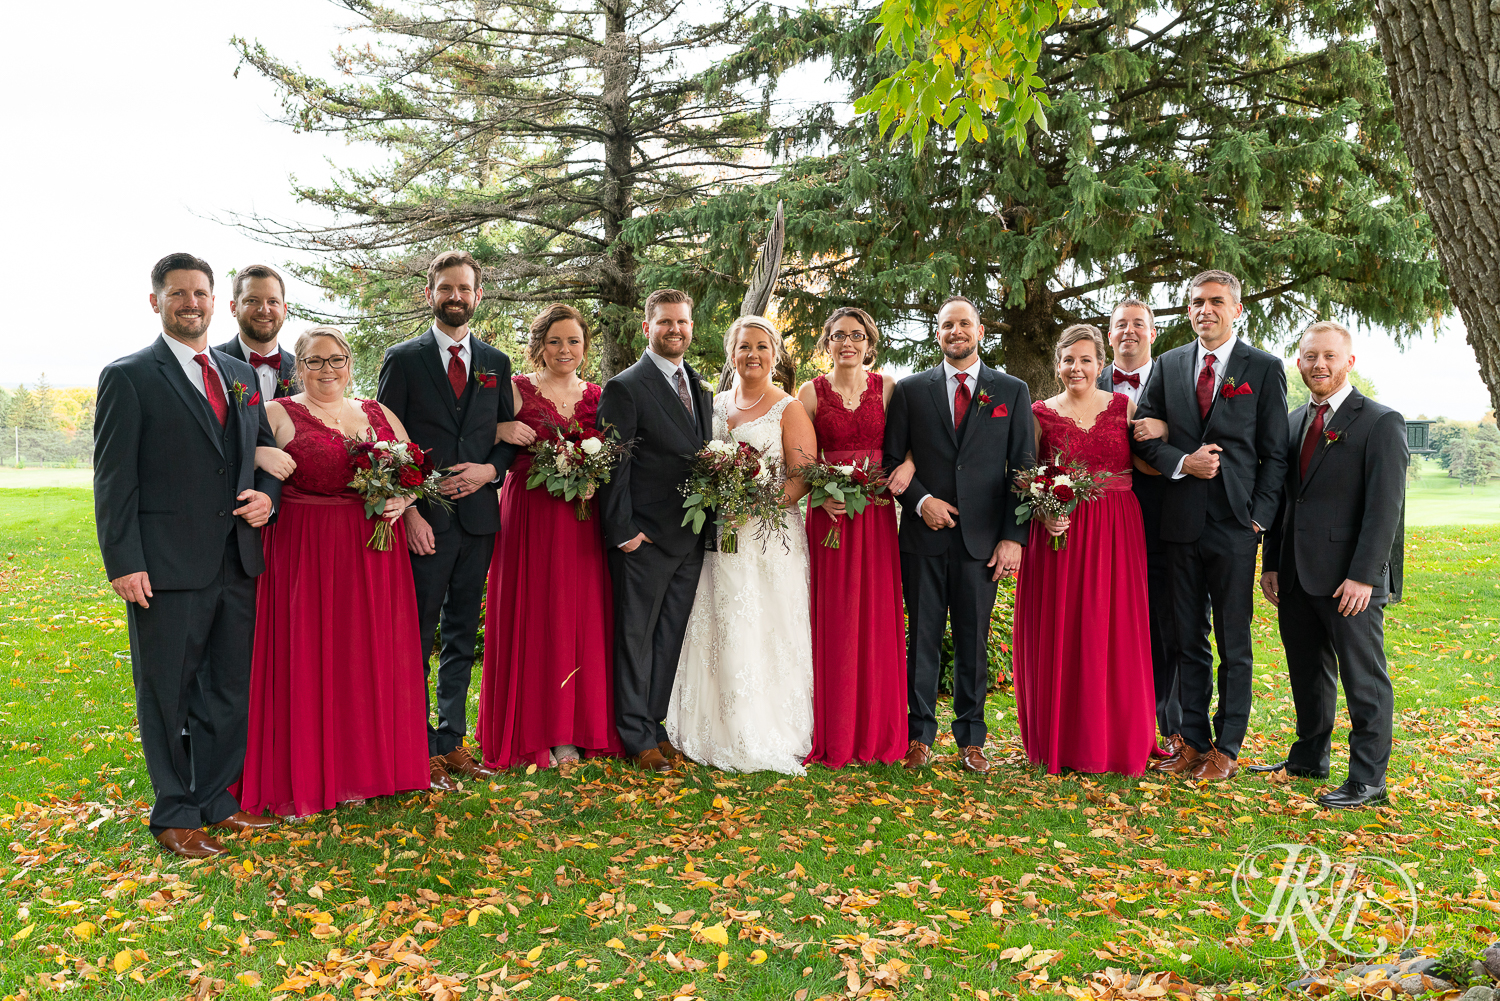 Wedding party in red dresses and gray suits at Hastings Golf Club in Hastings, Minnesota.